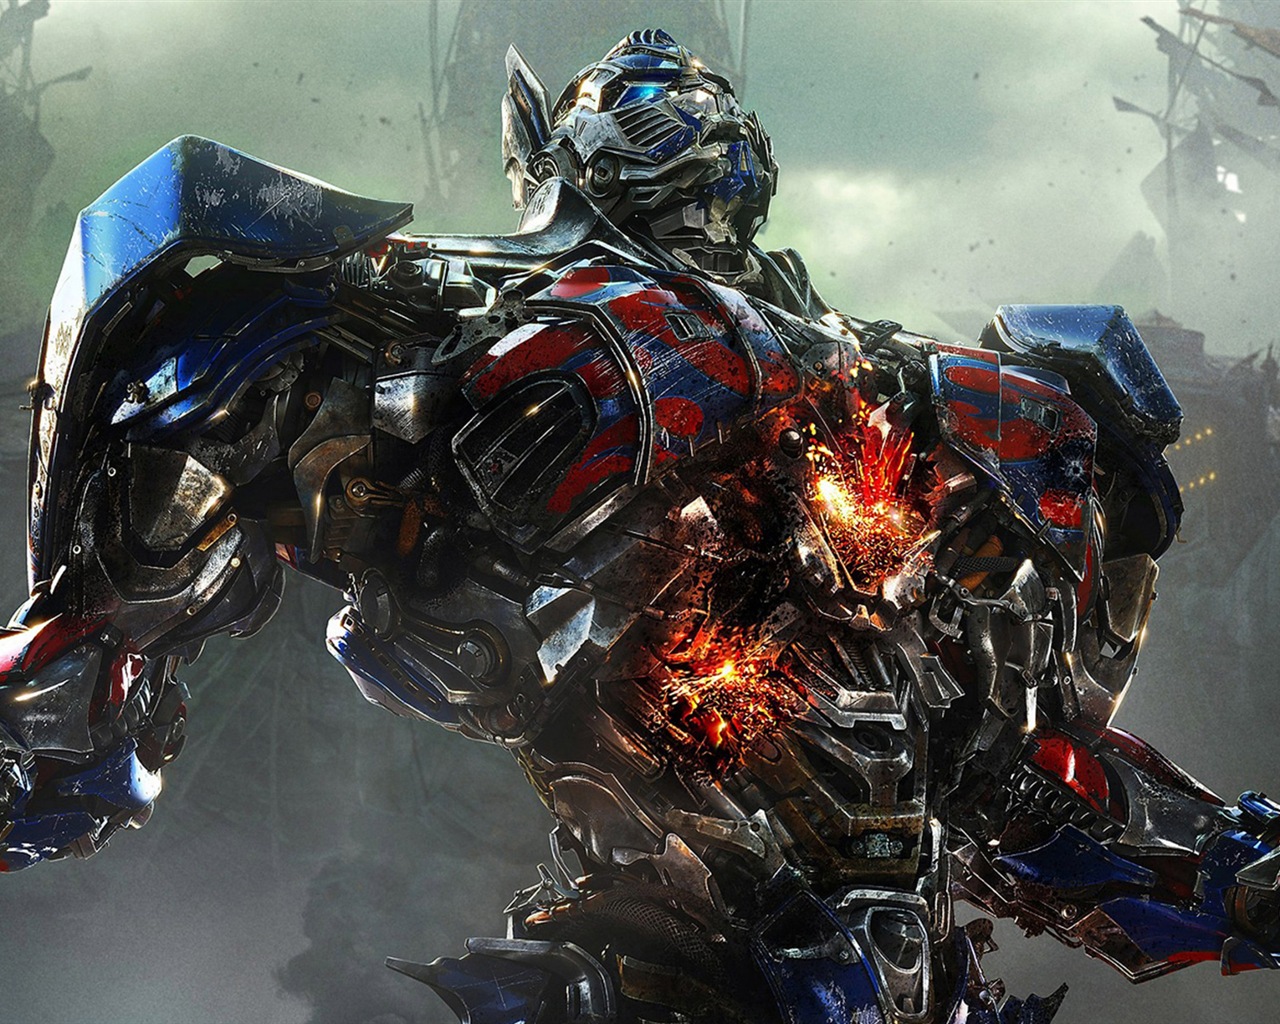 2014 Transformers: Age of Extinction HD tapety #5 - 1280x1024